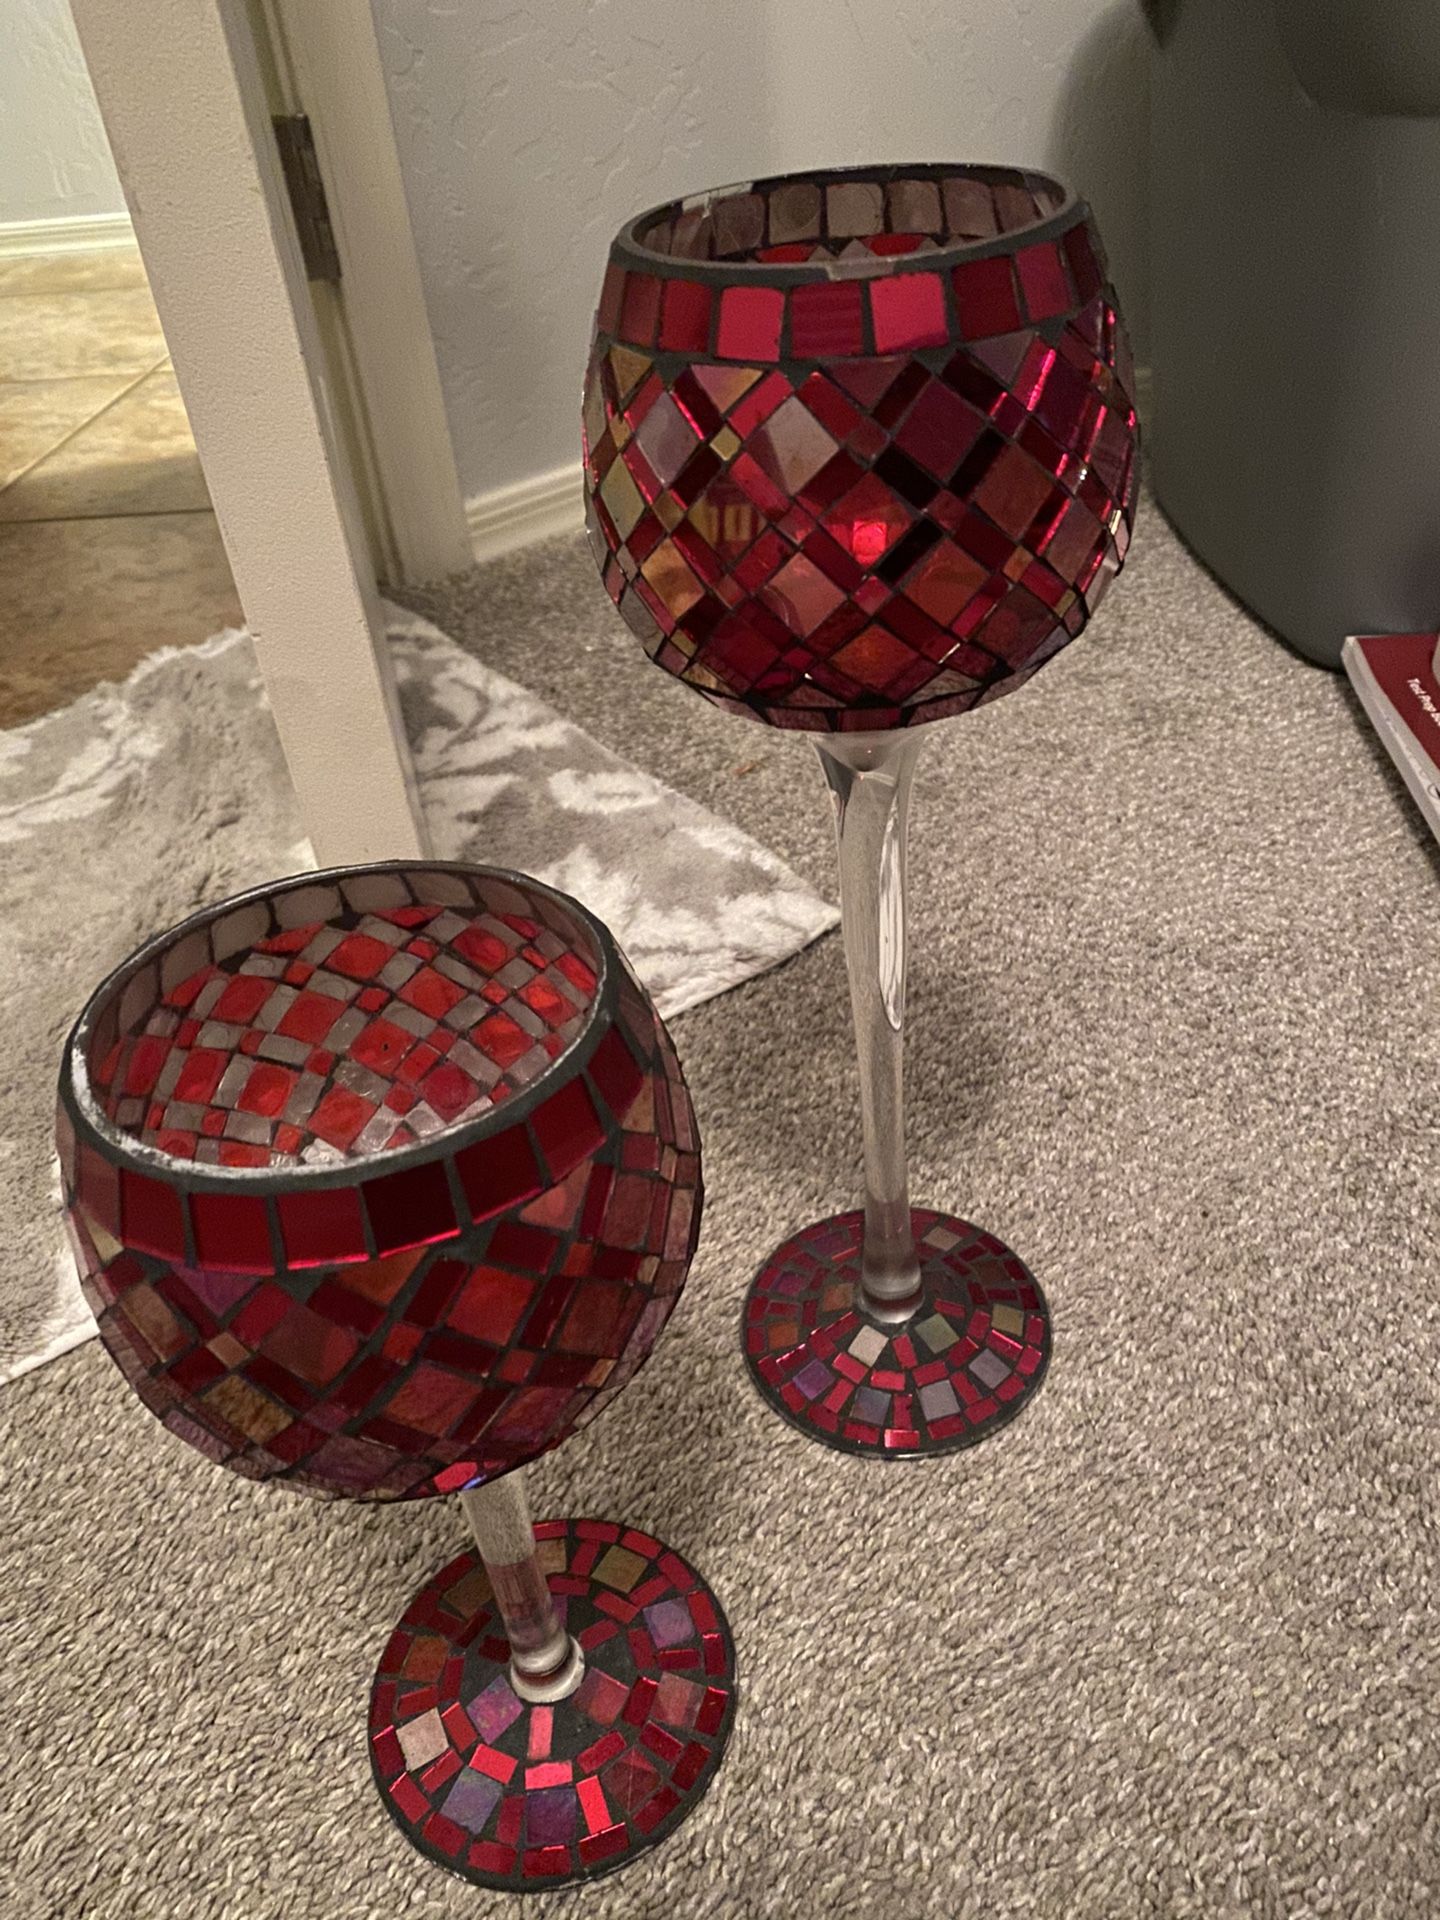 Holiday / Christmas red home decor. Glass candle holders, candles on decorative cups, set of throw pillows, wood vase and lamp shade